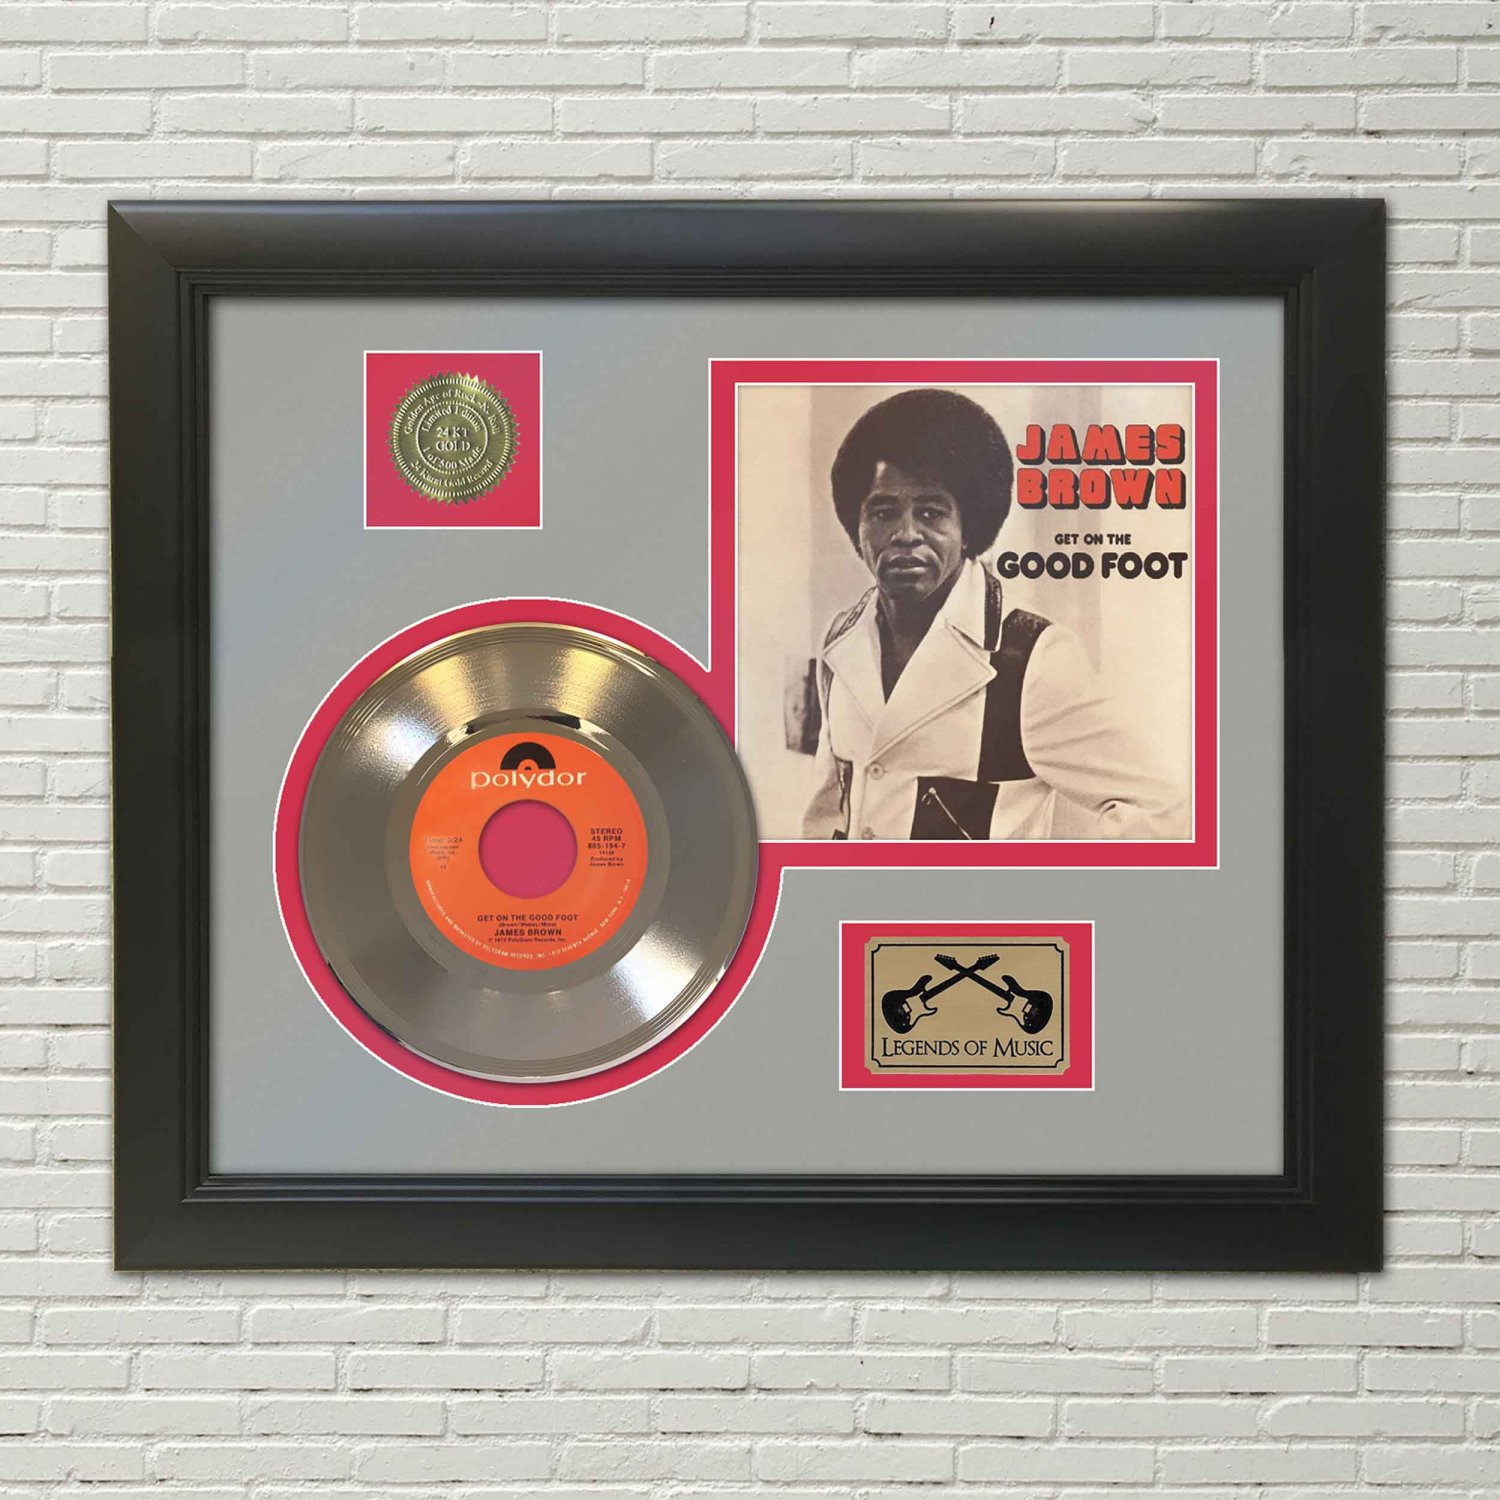 JAMES BROWN "Get on Good Foot" Framed Picture Sleeve Gold 45 Record Display